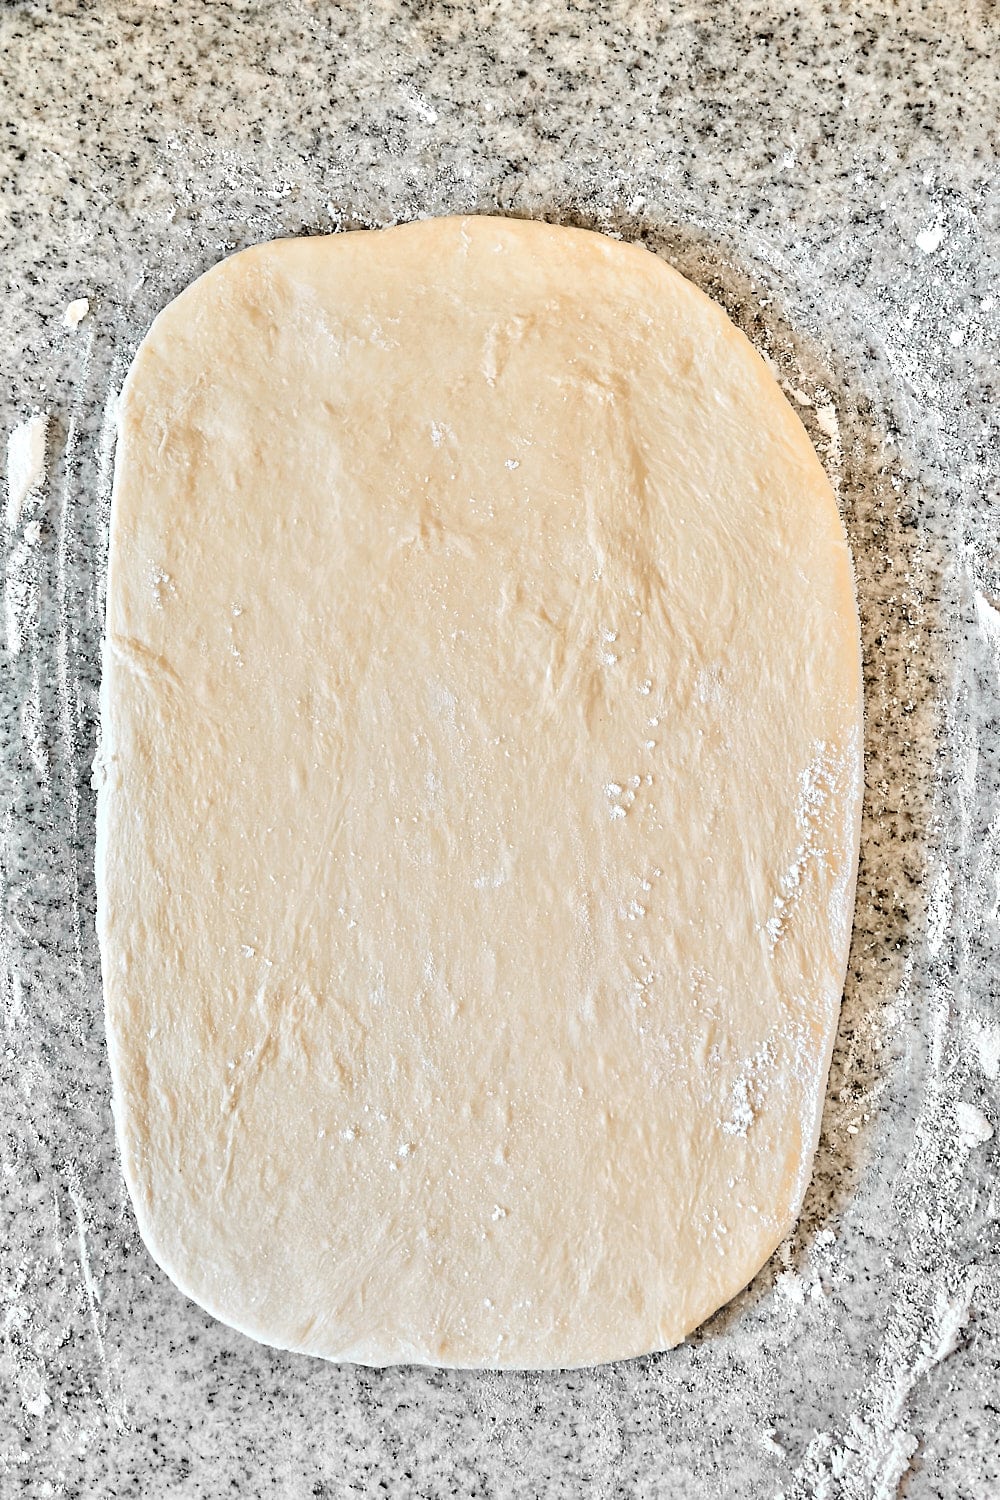 Rolling the dough out into an even rectangle.